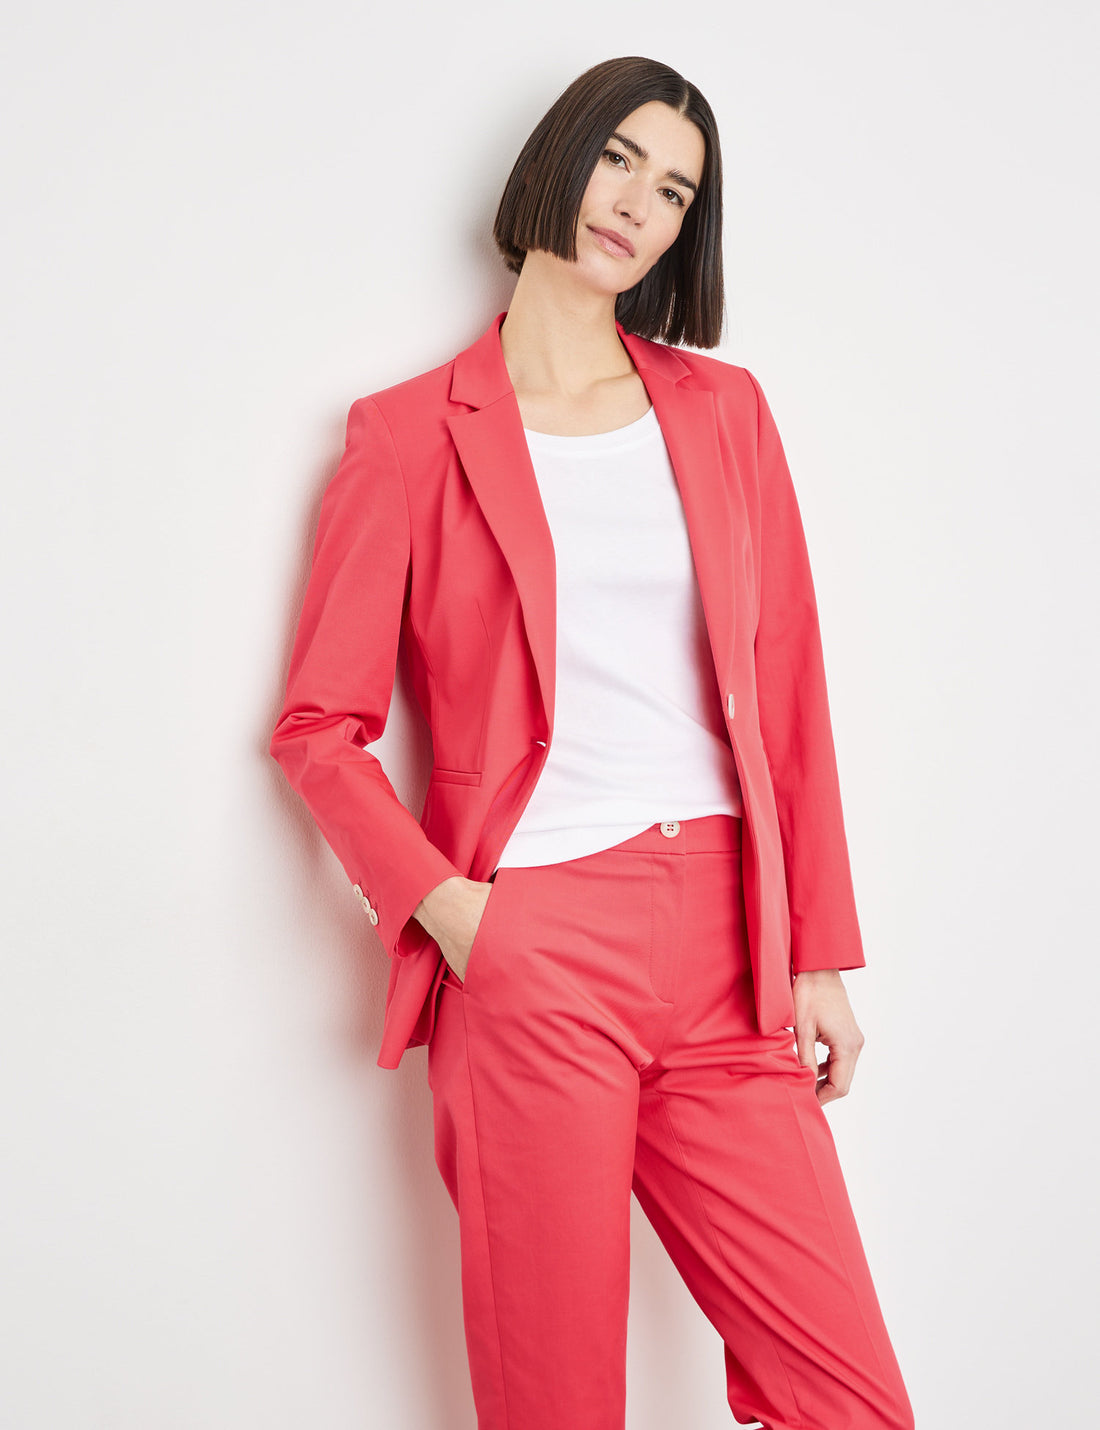 Classic Blazer With Stretch For Comfort_330004-31332_60140_01